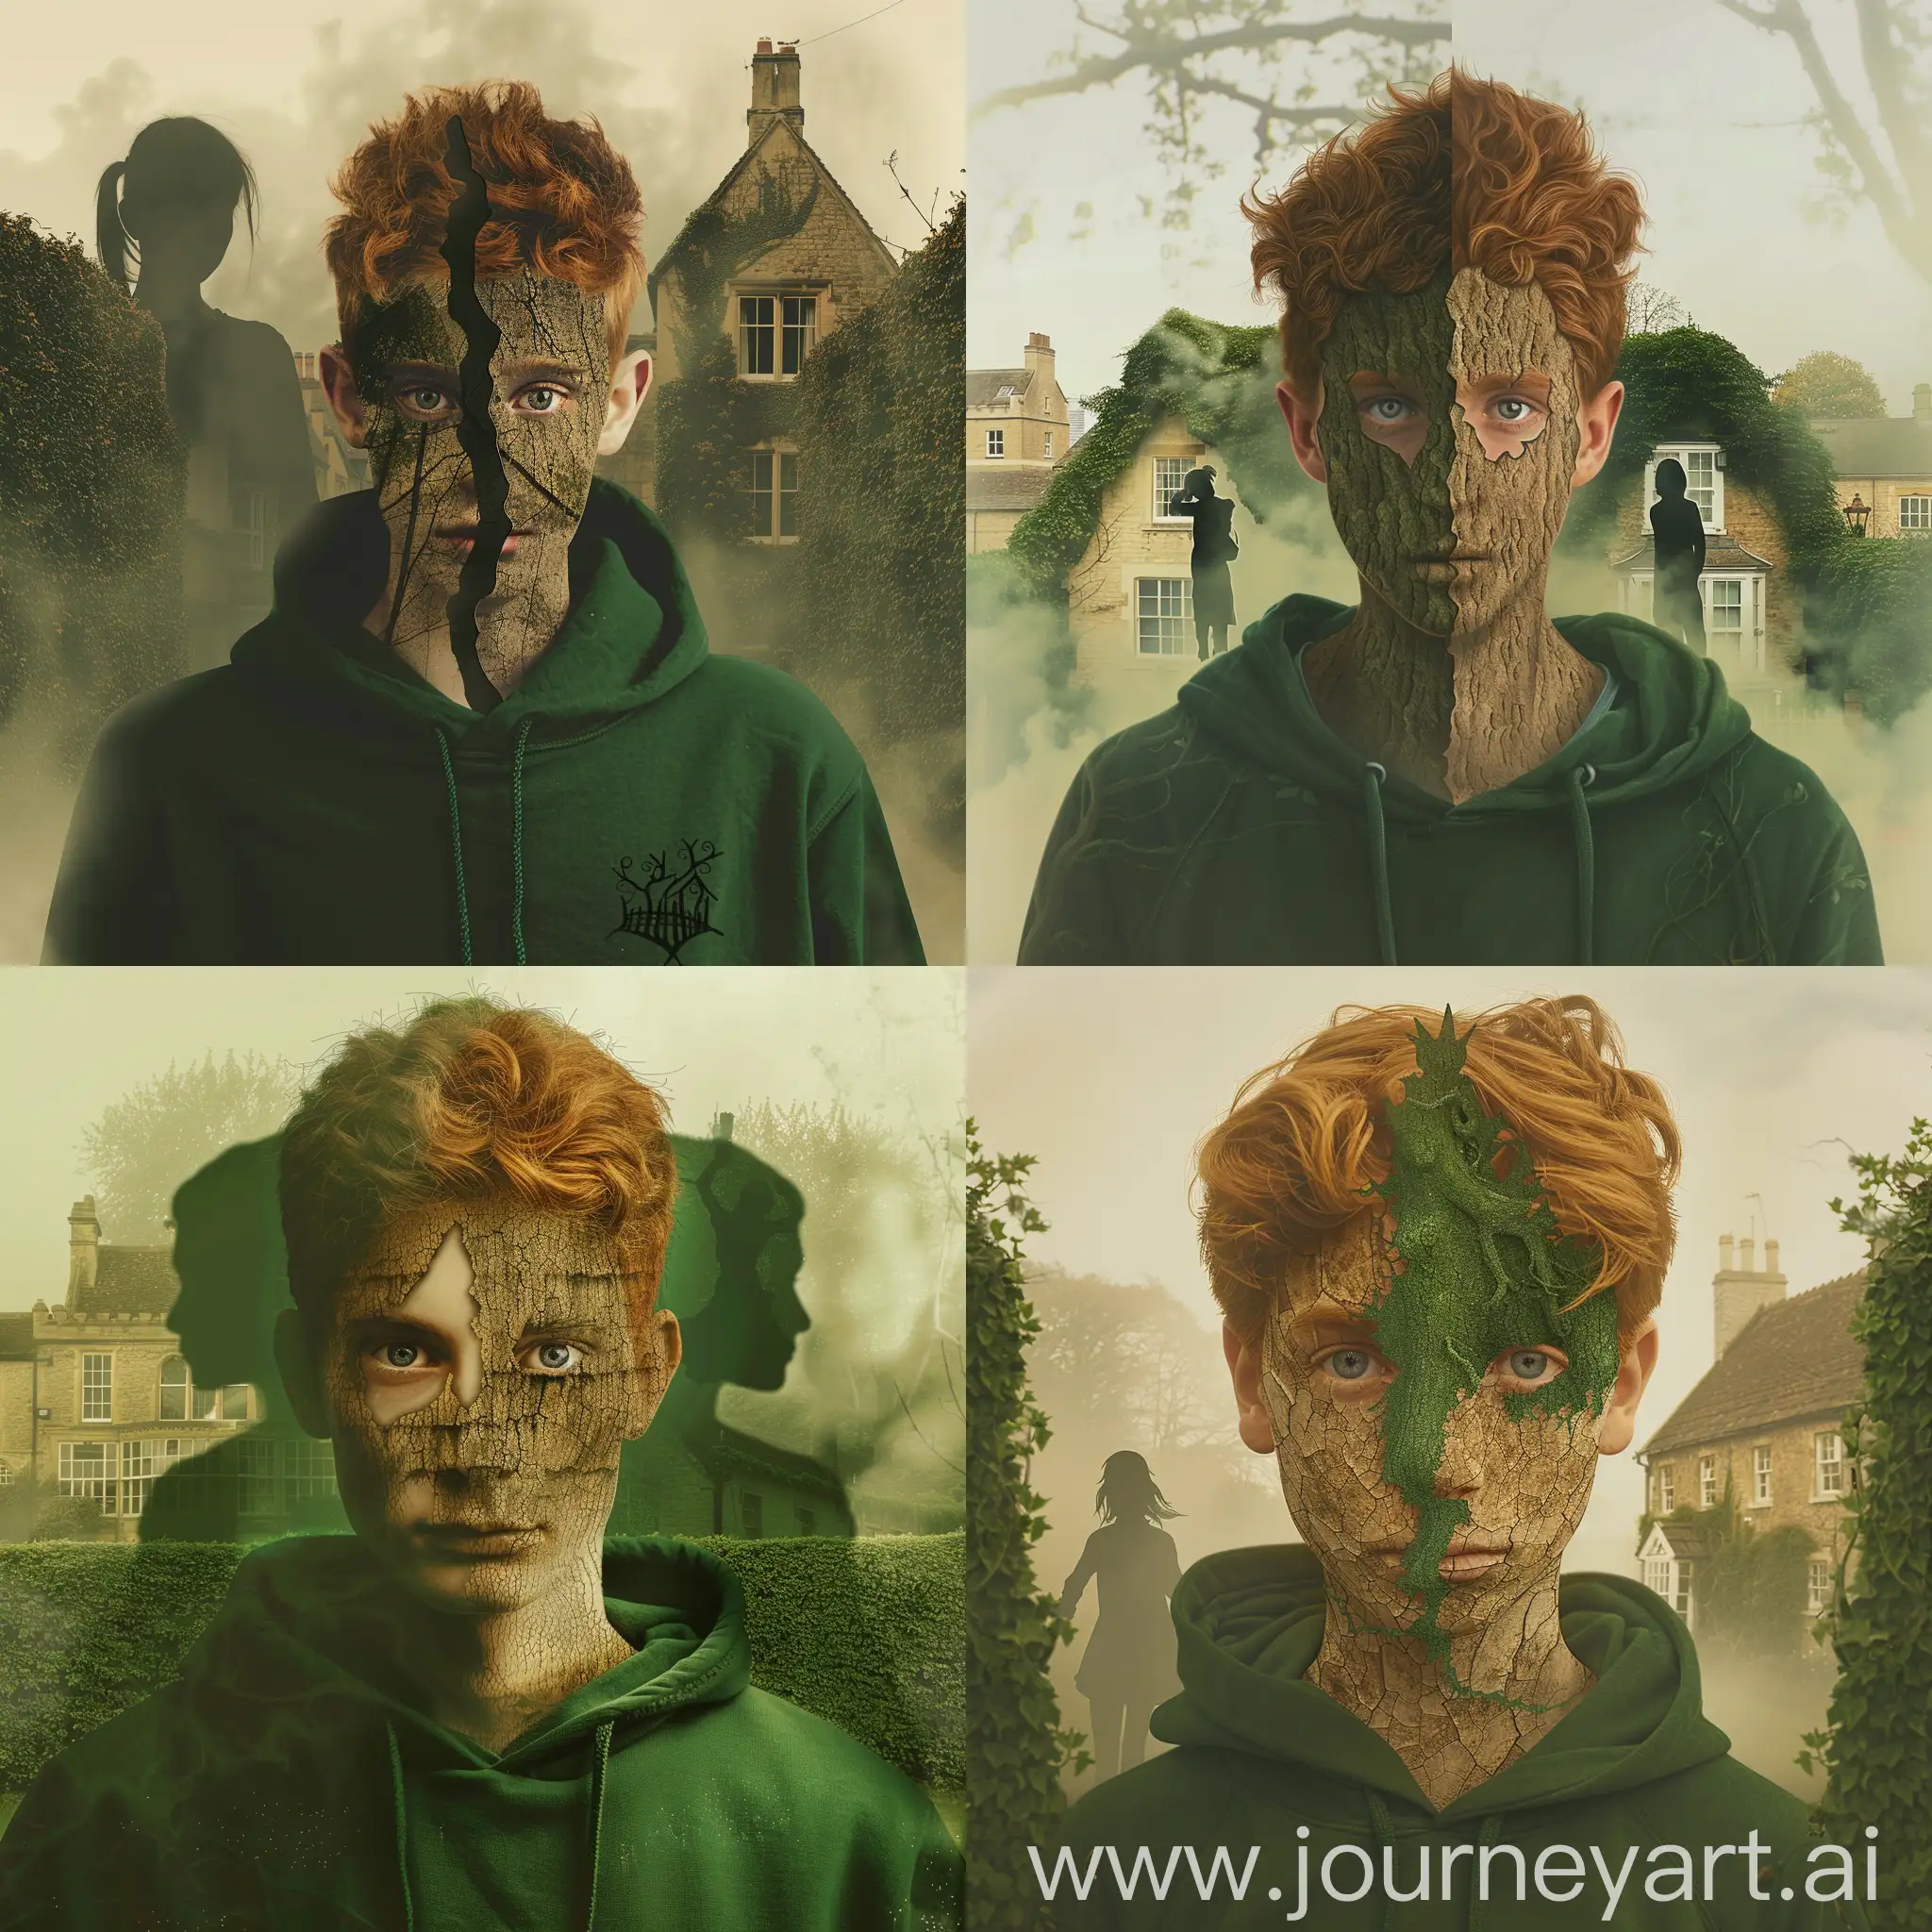 A young man with ginger hair in a green hoodie is shown up to his shoulders. The man’s features are pointy and his skin is brown, looking like tree bark. His eyes are grey and realistic and in each of them there is an identical reflection of a silhouette of a teenage girl. On one side of the man in the haze in the background is Oxford, on the other side of him is an image in the haze of a creeper-covered cottage with sash windows behind a tall green overgrown hedge. 